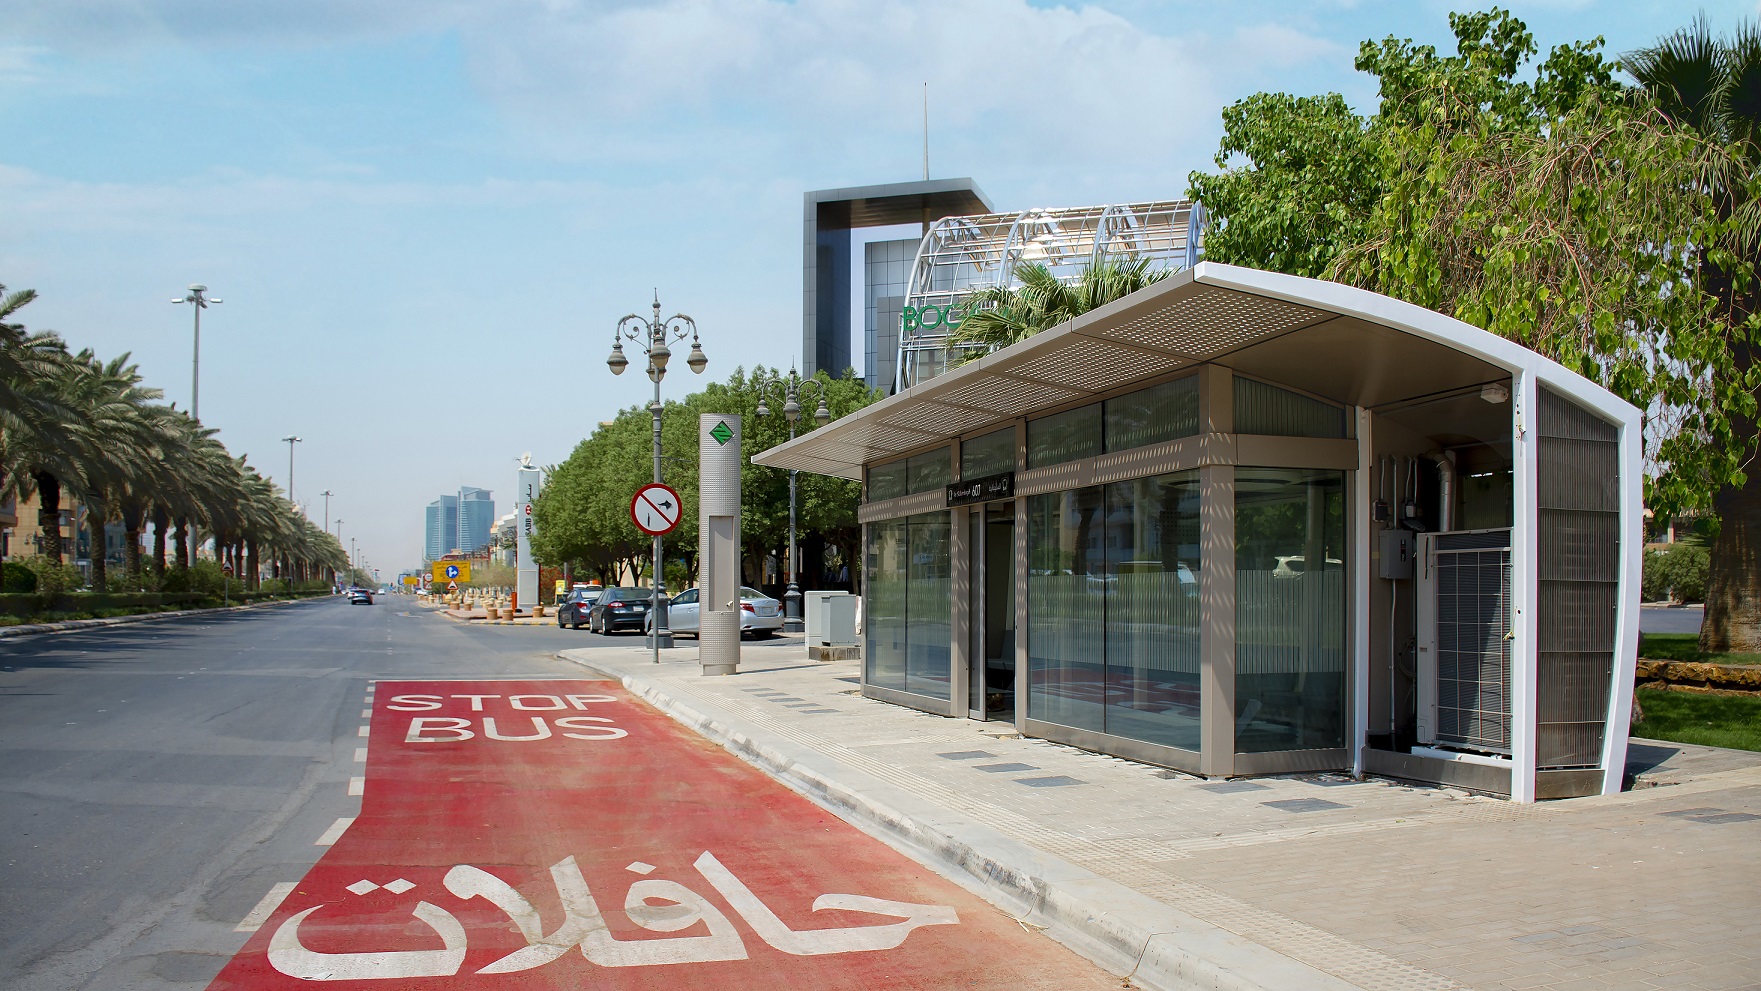 Community bus stop, bus rapid transit project, Royal Commission for Riyadh City